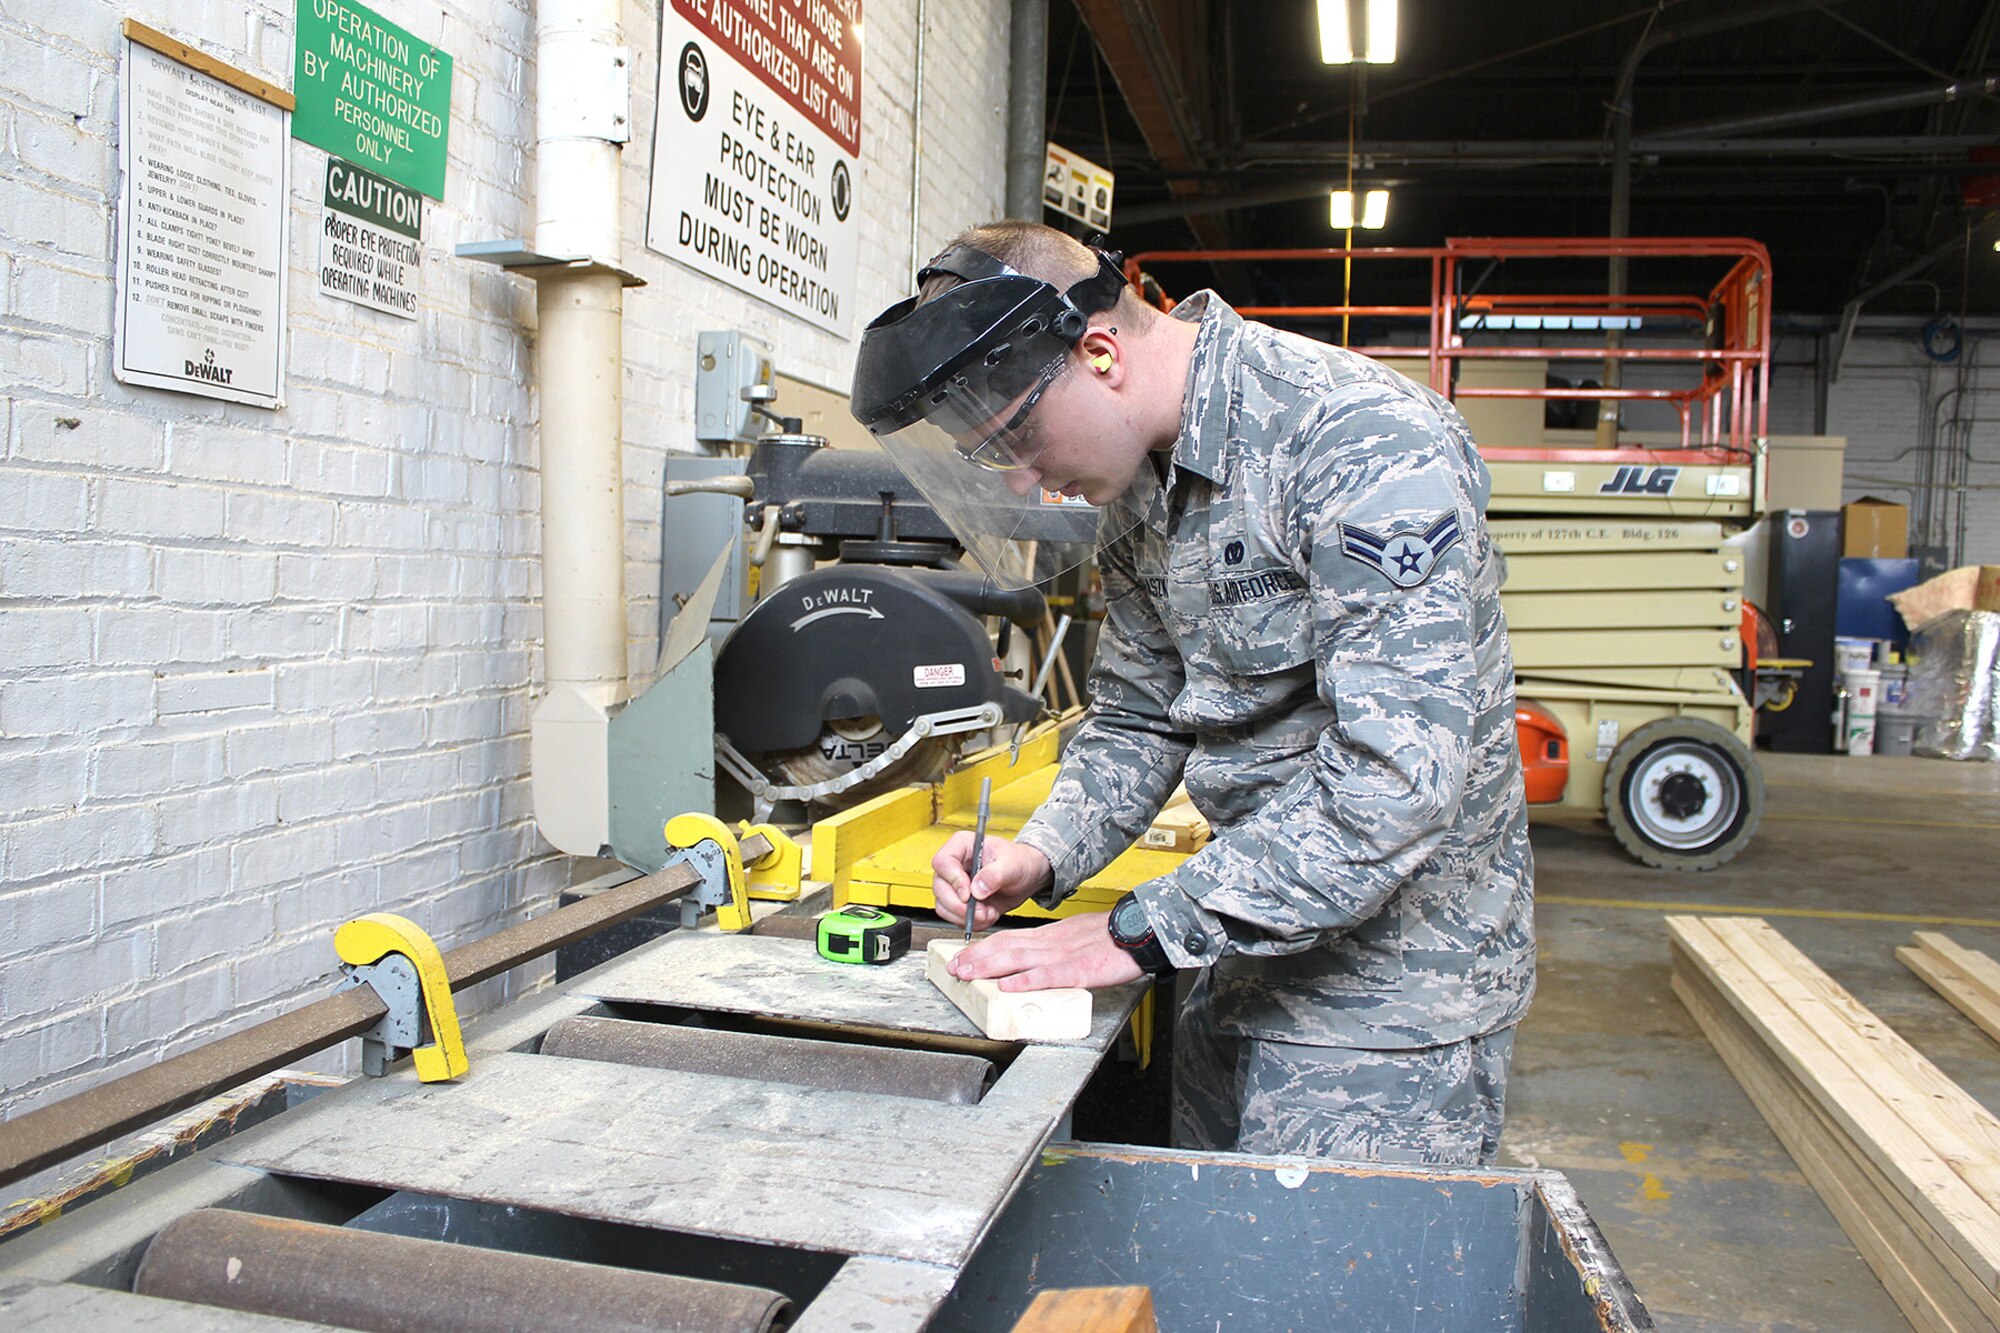 Airman 1st Class Paul Prohaszka, a member of the Structures flight of the 127th Civil Engineer Squadron, works in the wood shop at Selfridge Air National Guard Base, Mich., May 4, 2018. Michigan Citizen-Airmen at Selfridge conducted a four-day training drill at Selfridge to refresh career-specific and warfighting skills. (U.S. Air National Guard photo by Tech. Sgt. Dan Heaton)